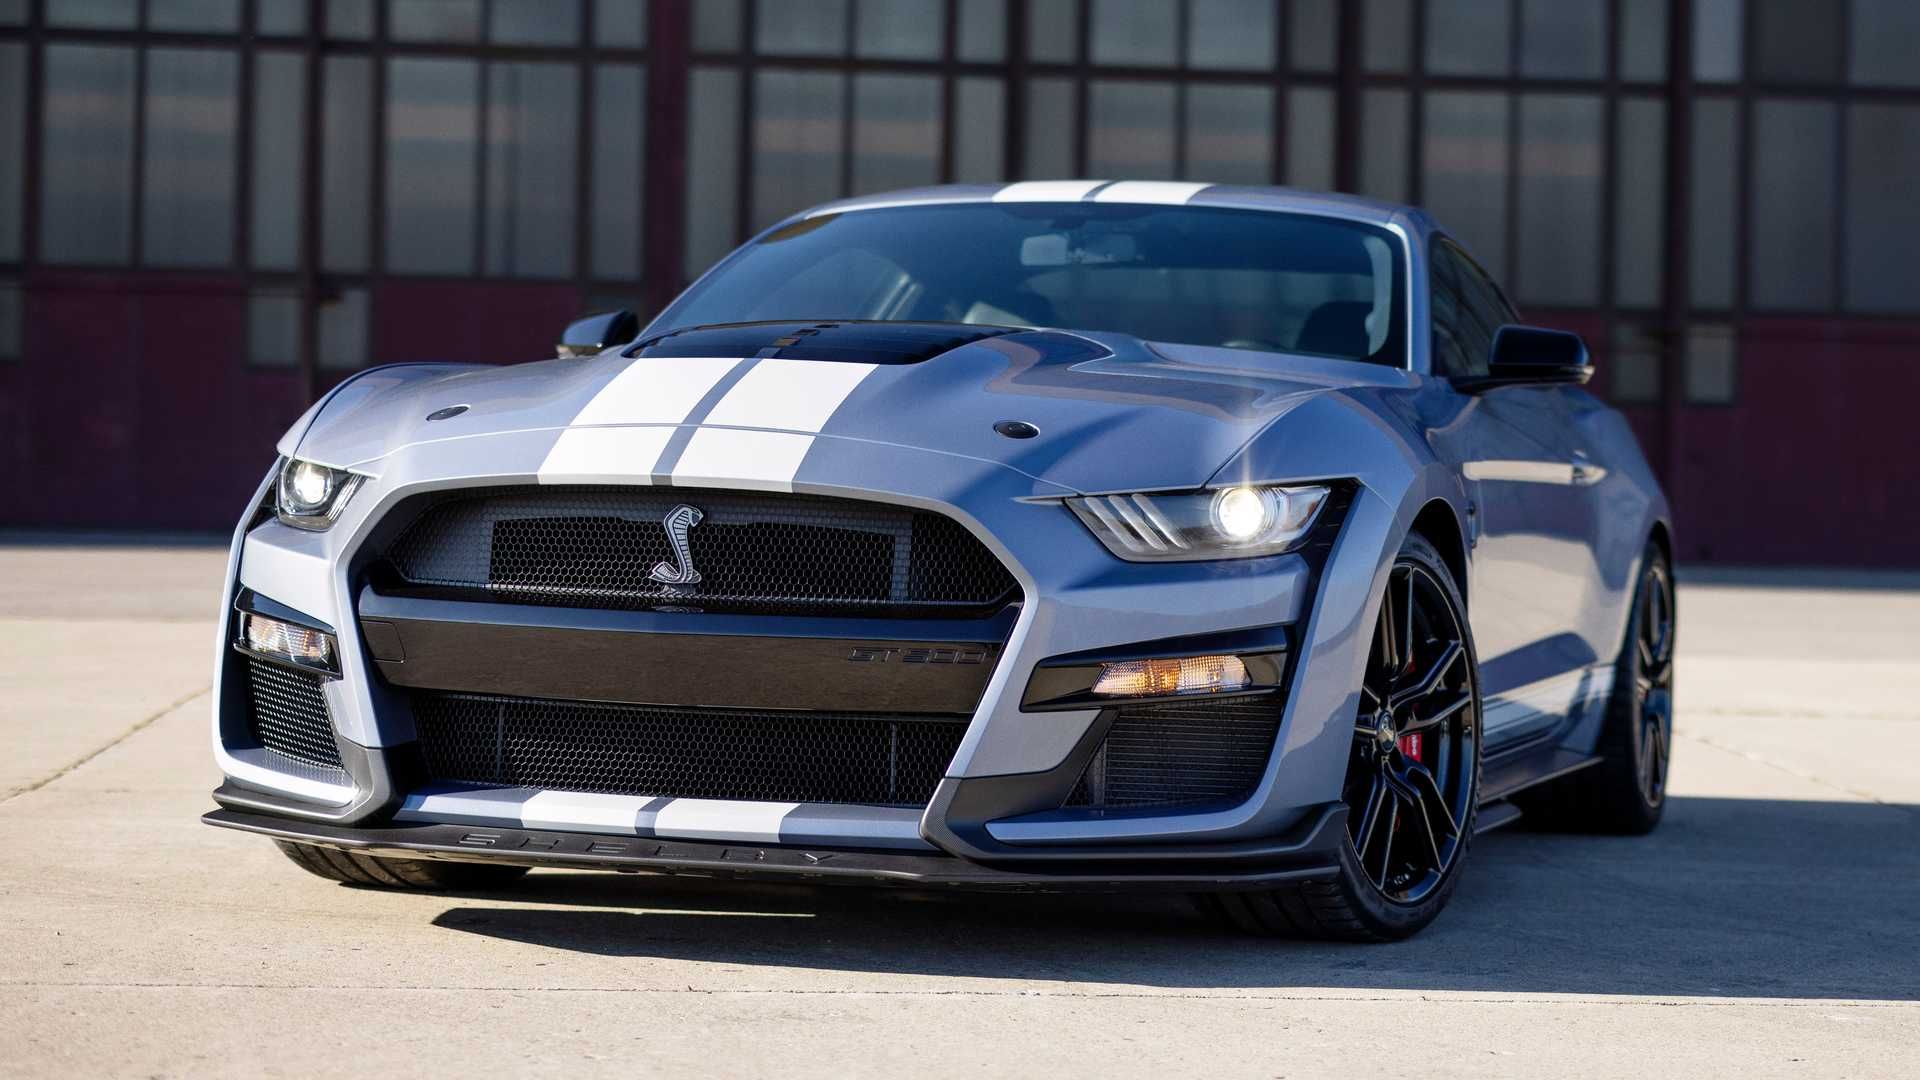 2022 Ford Mustang Shelby GT500, front view close up